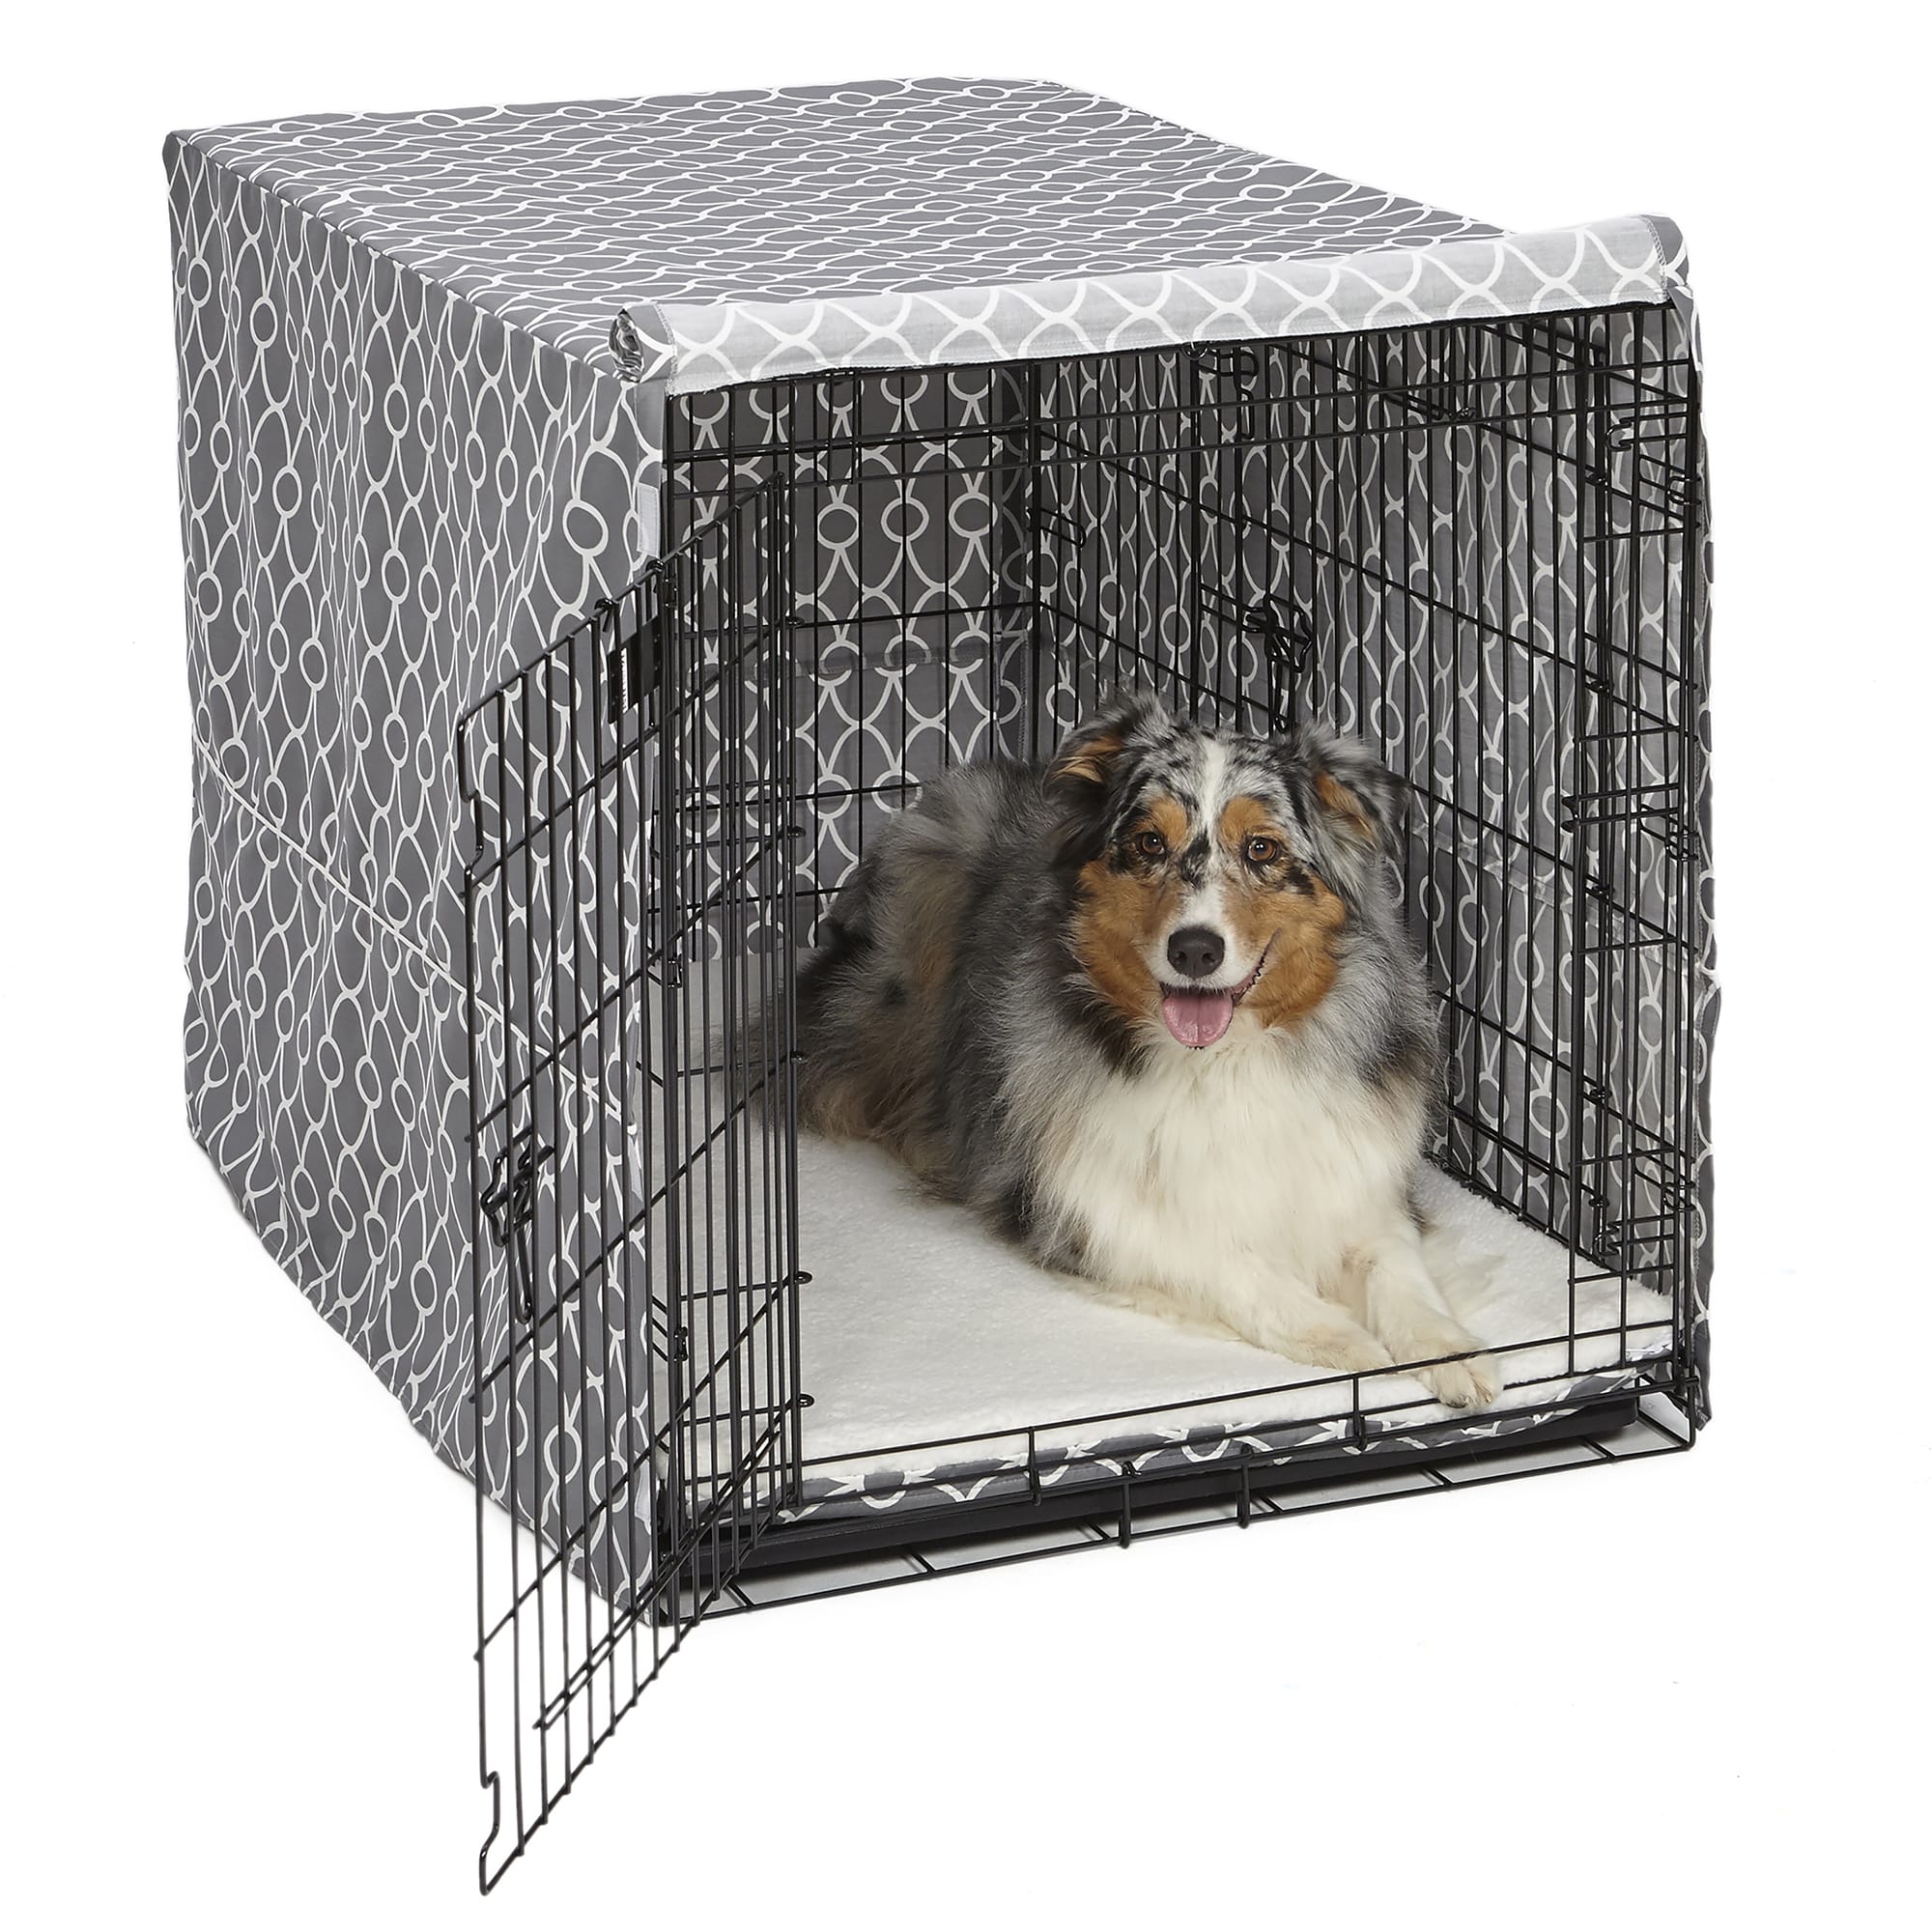 Midwest Quiet Time Defender Gray Crate Cover for Dogs, 42" L Petco